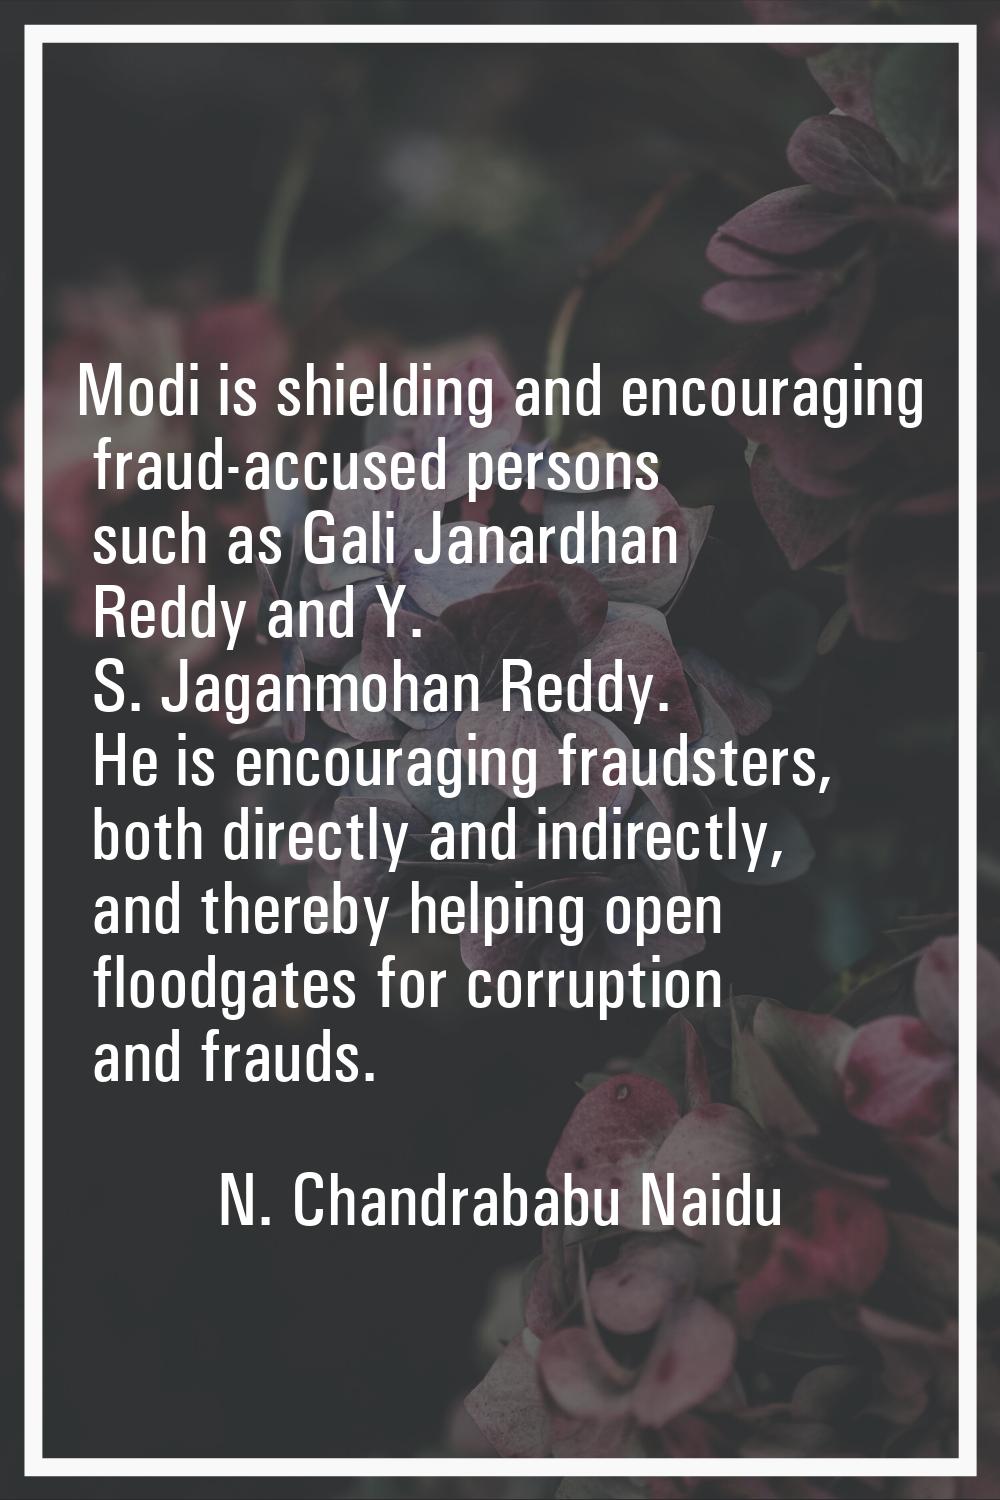 Modi is shielding and encouraging fraud-accused persons such as Gali Janardhan Reddy and Y. S. Jaga